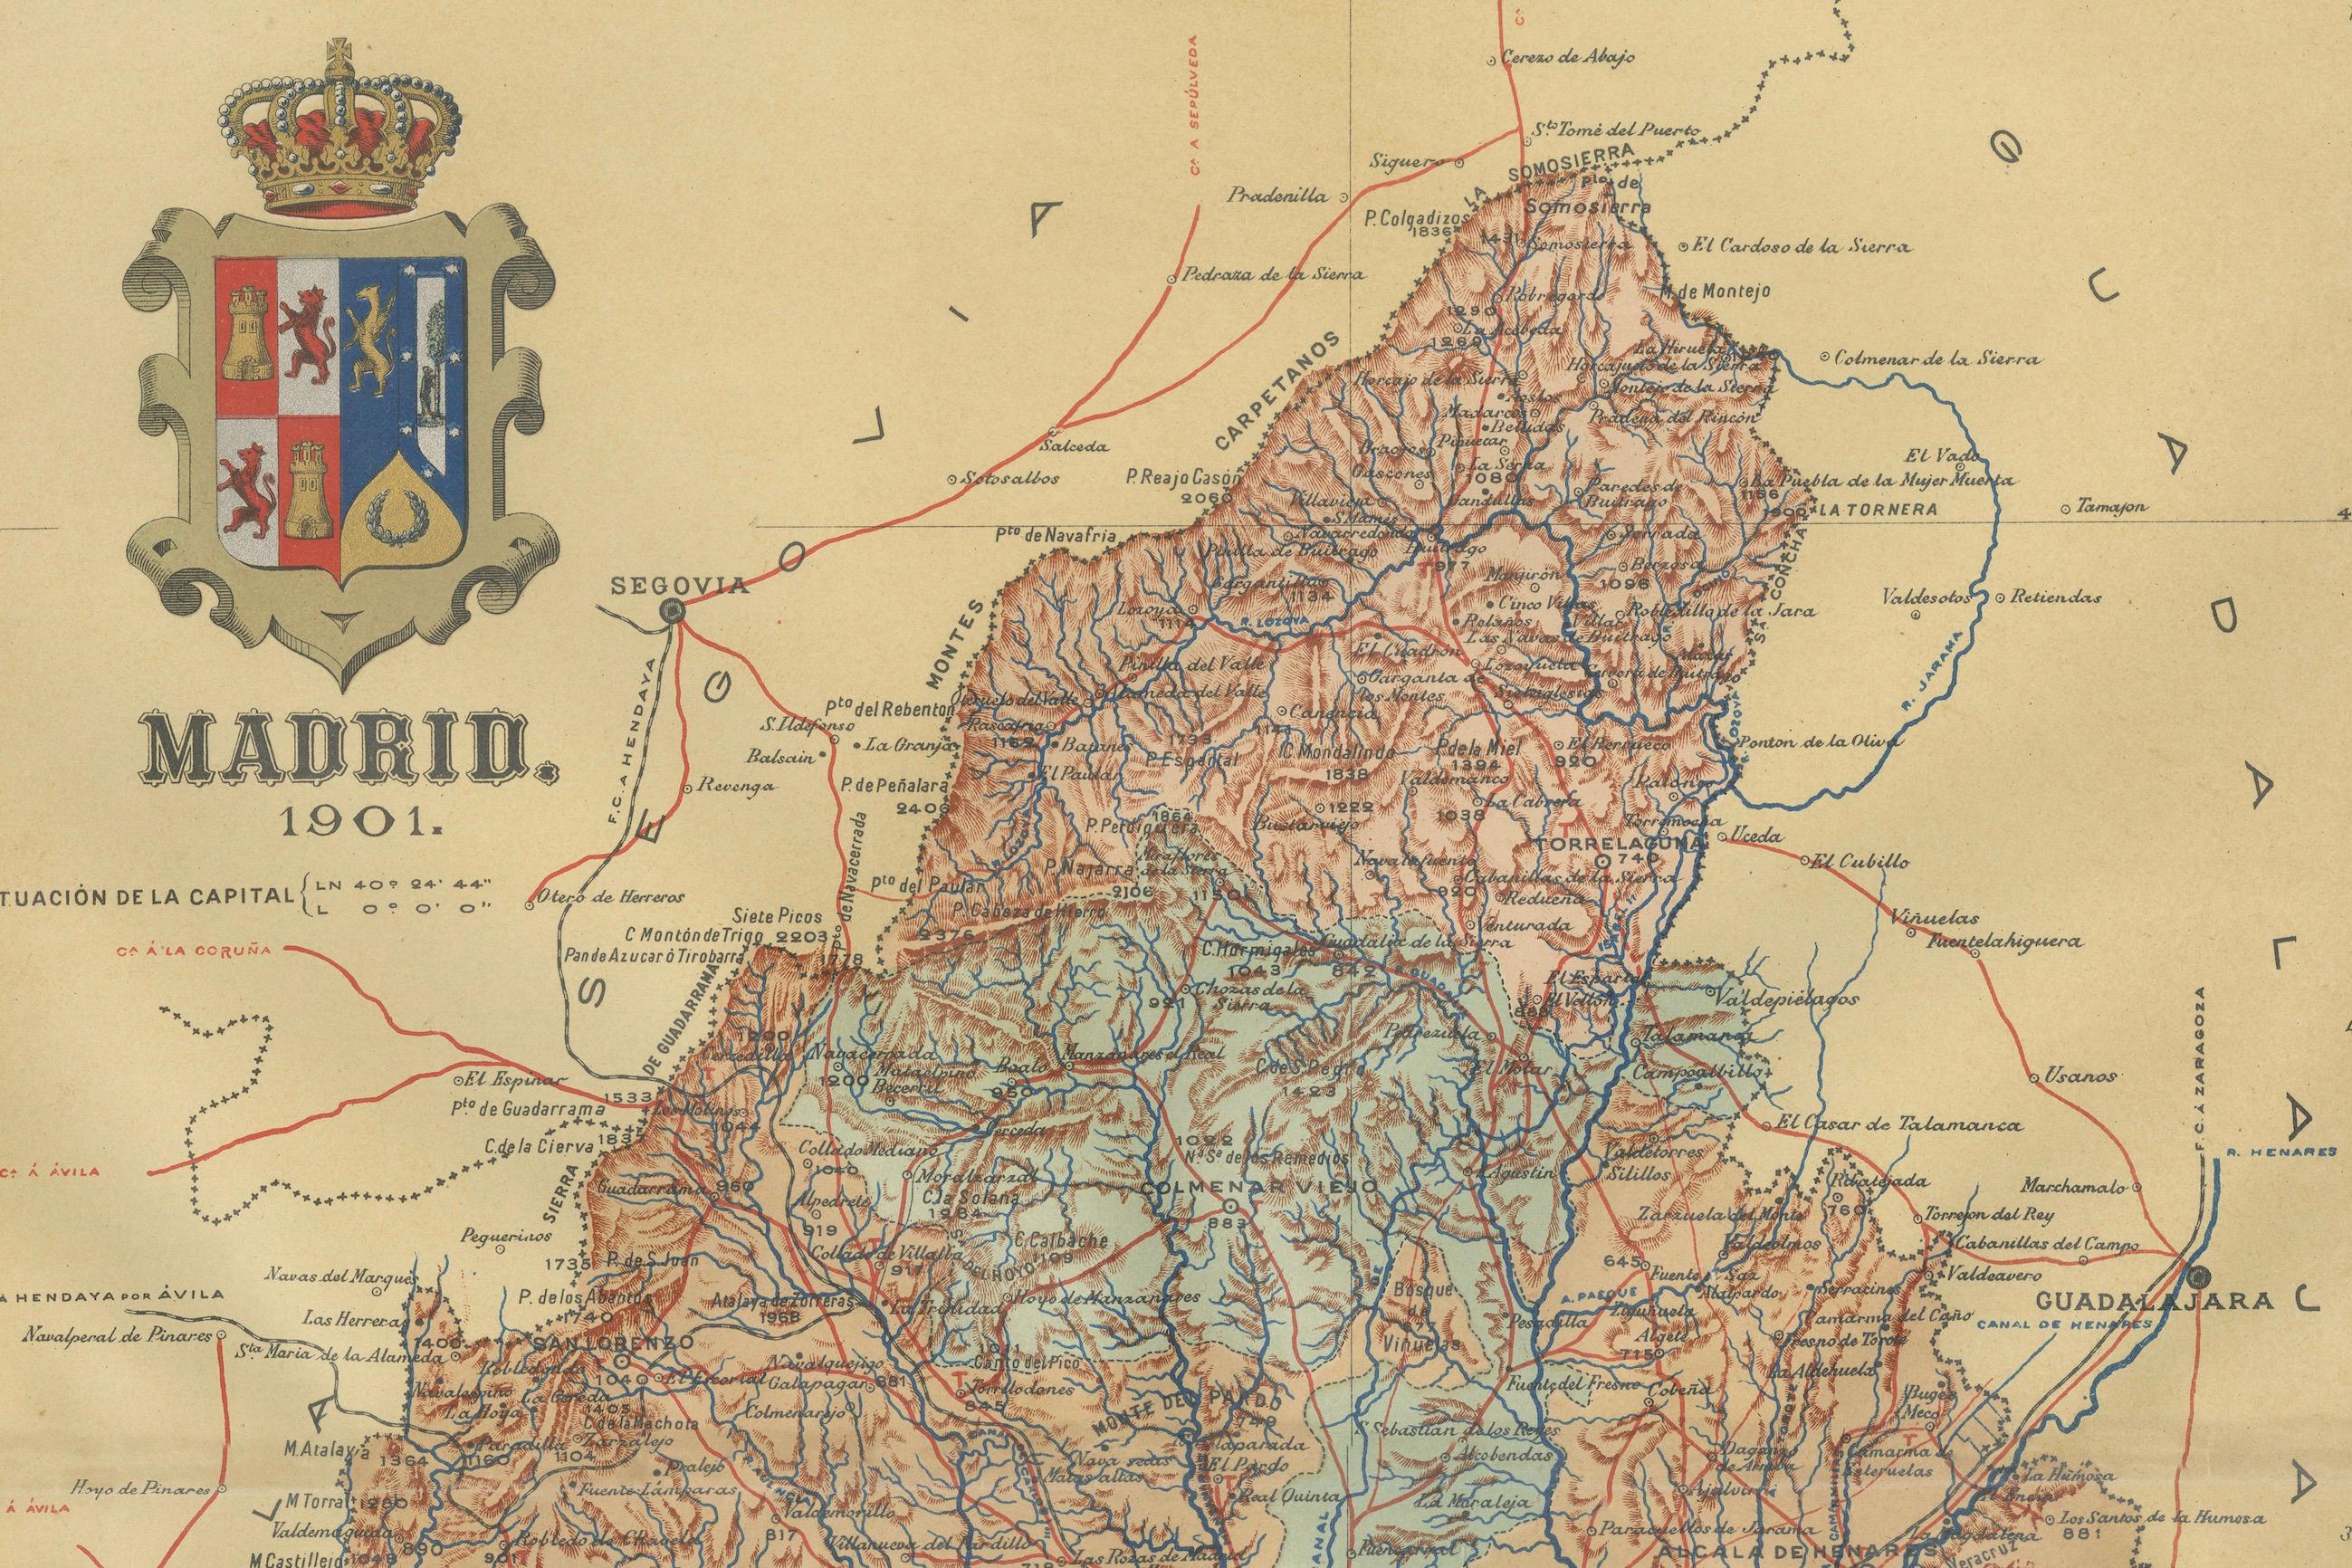 The map is of the province of Madrid, the capital region of Spain, as it appeared in 1901. Here are the key features it displays:

The map shows the central part of Spain, with the Guadarrama mountain range prominently visible, marking the natural